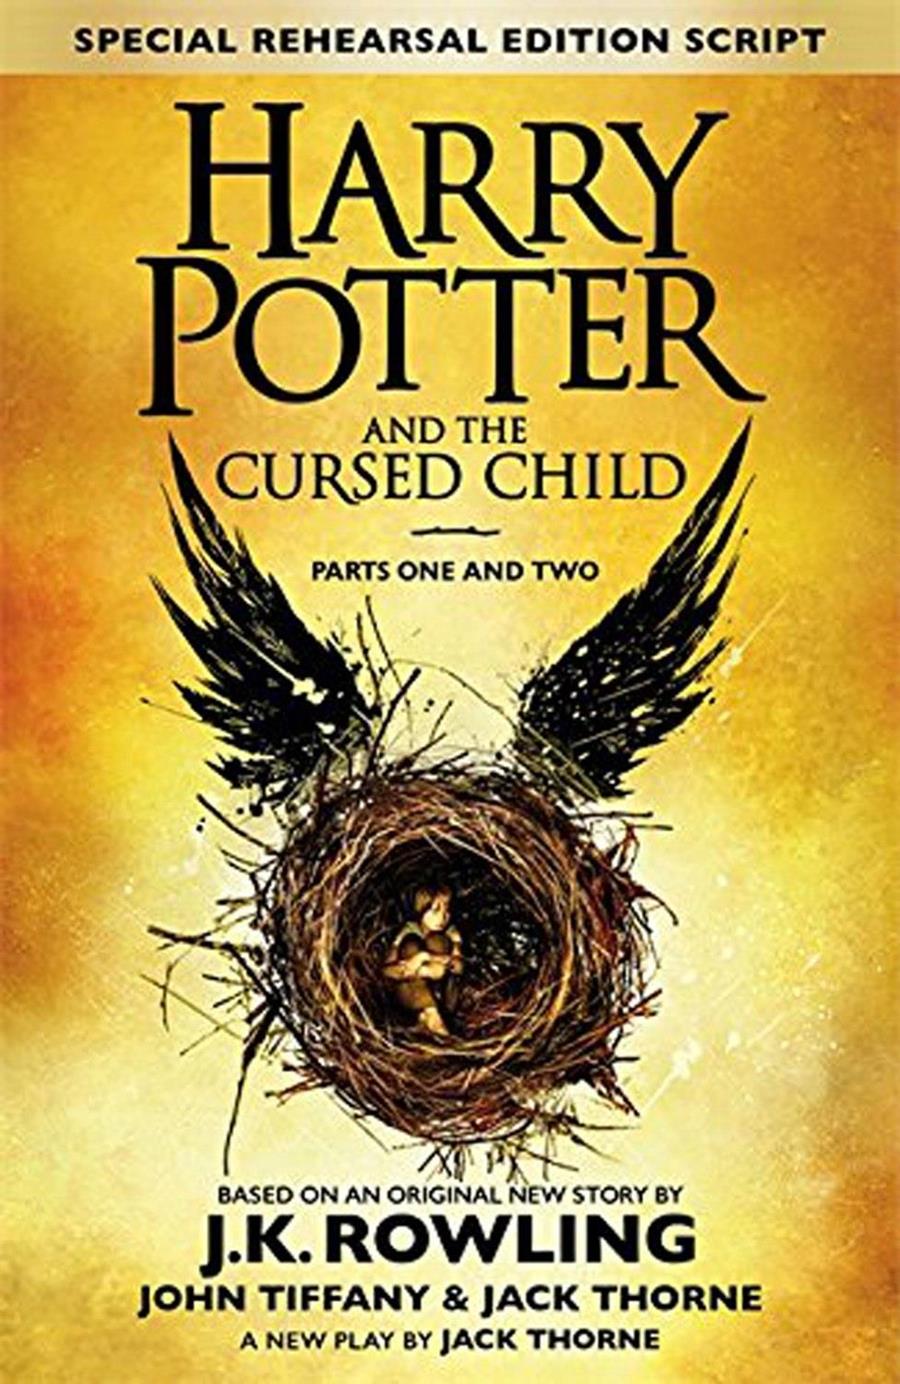 HARRY POTTER AND THE CURSED CHILD | 9780751565355 | J. K. ROWLING